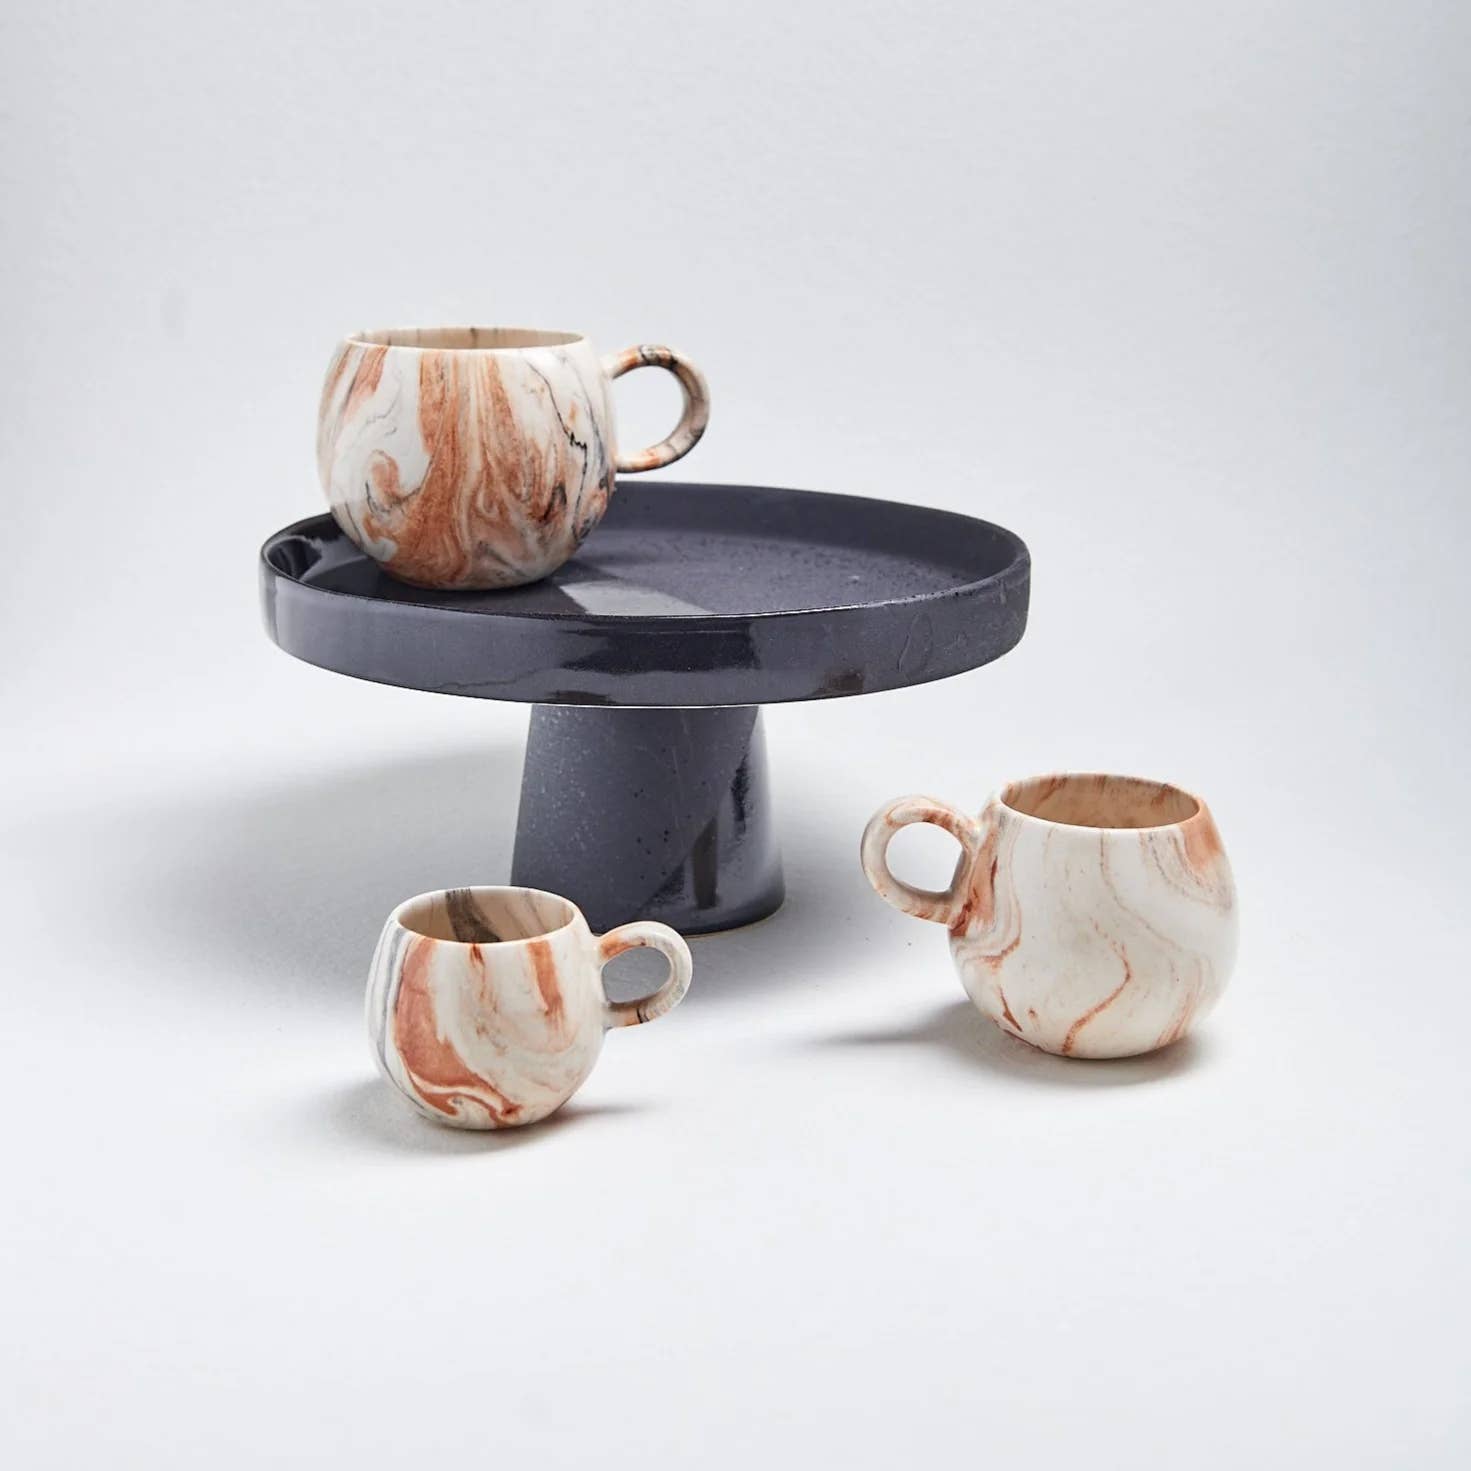 Egg Back Home Marble Mug Collection of 3 mugs in small, medium, and large displayed on and around a black pastry stand